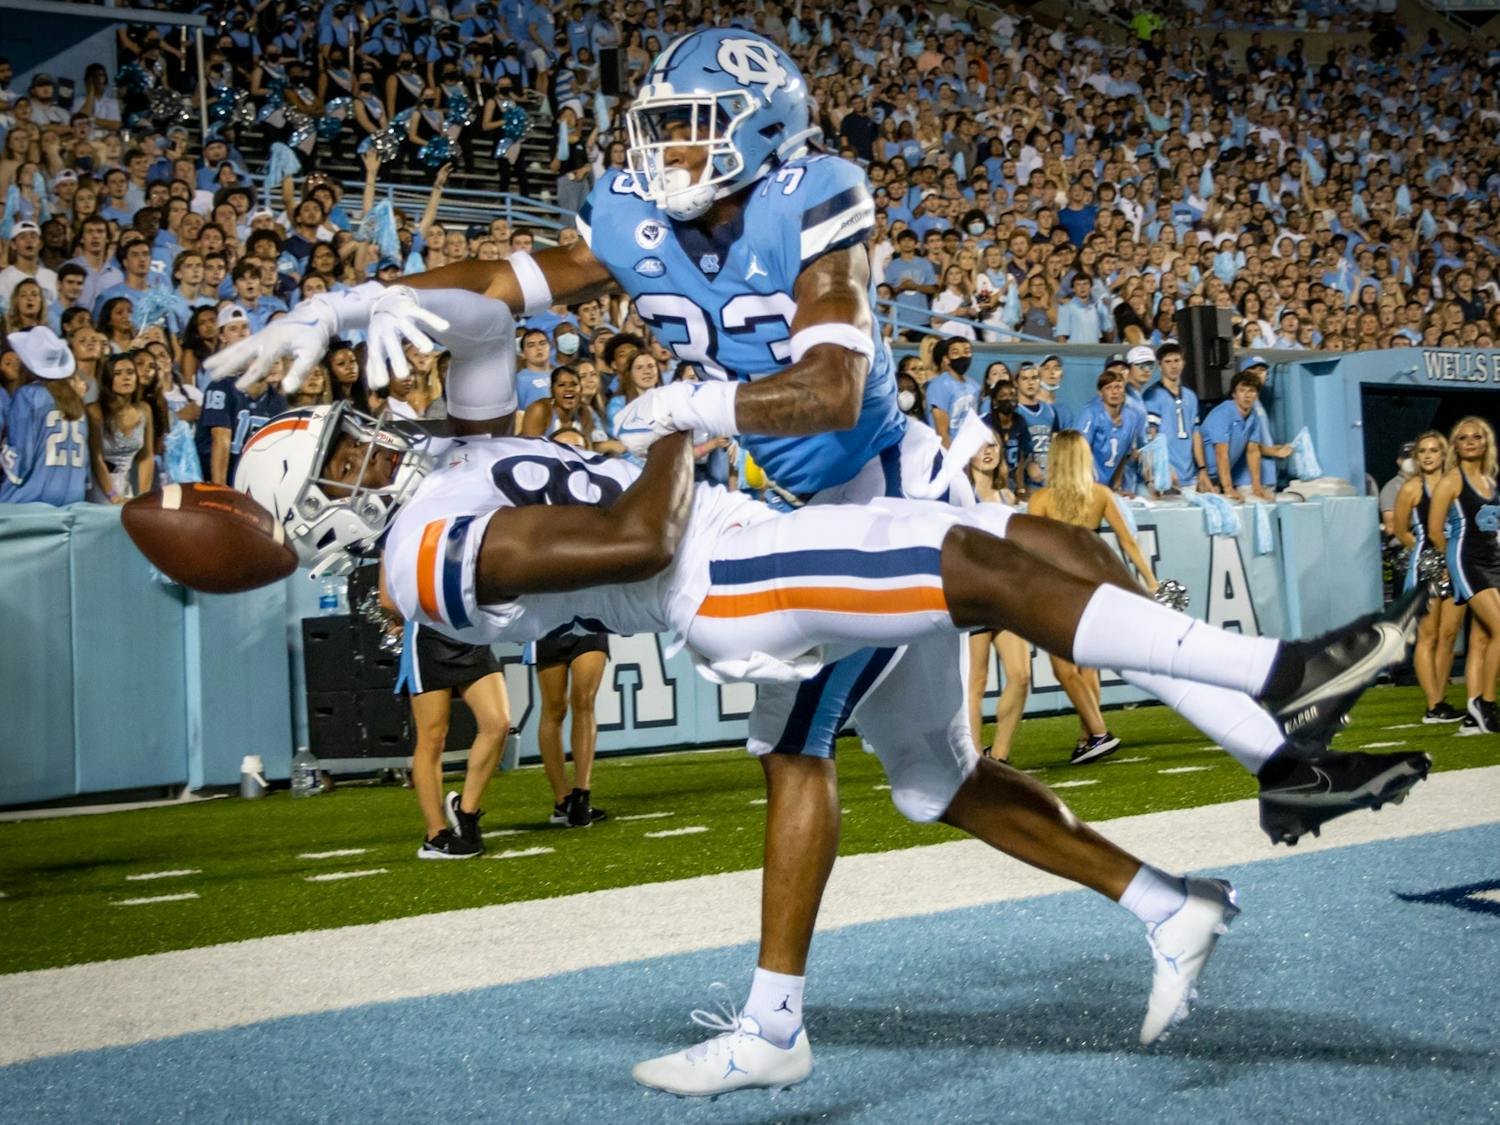 UNC football topples the UVA Cavaliers 59-39 in second home game of the season